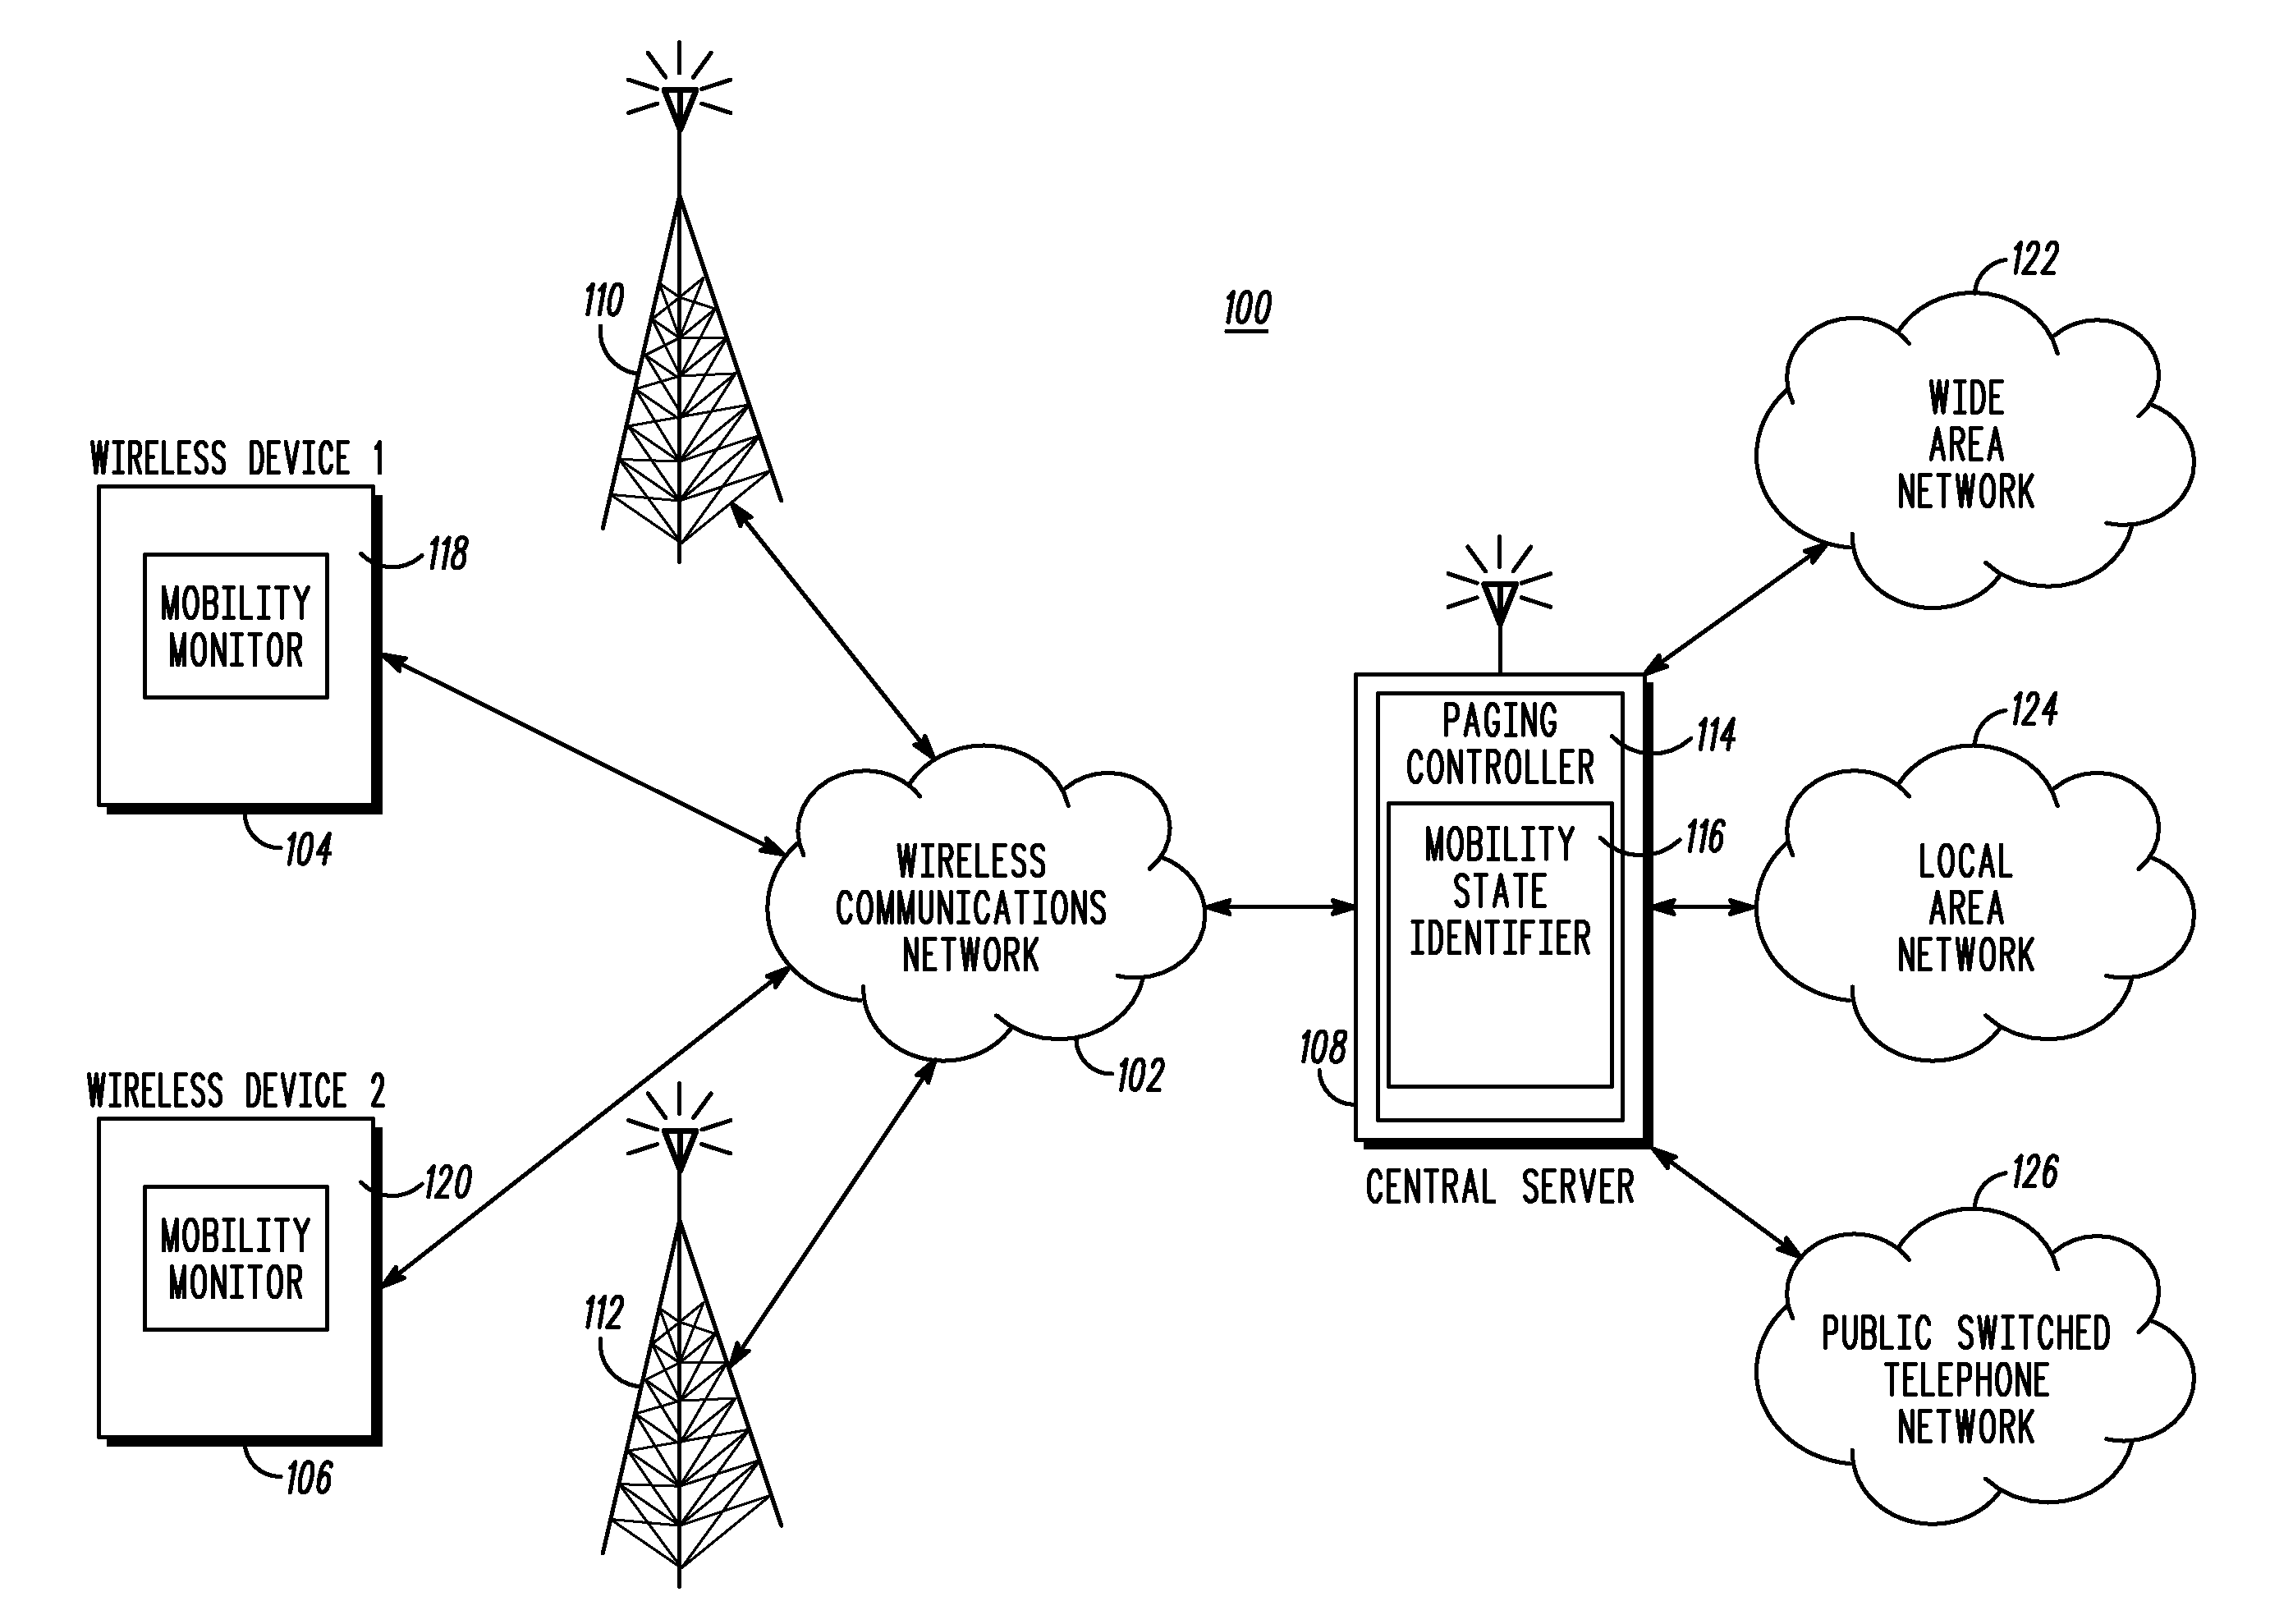 Selection of wireless communication cells based on a mobility state of a wireless device